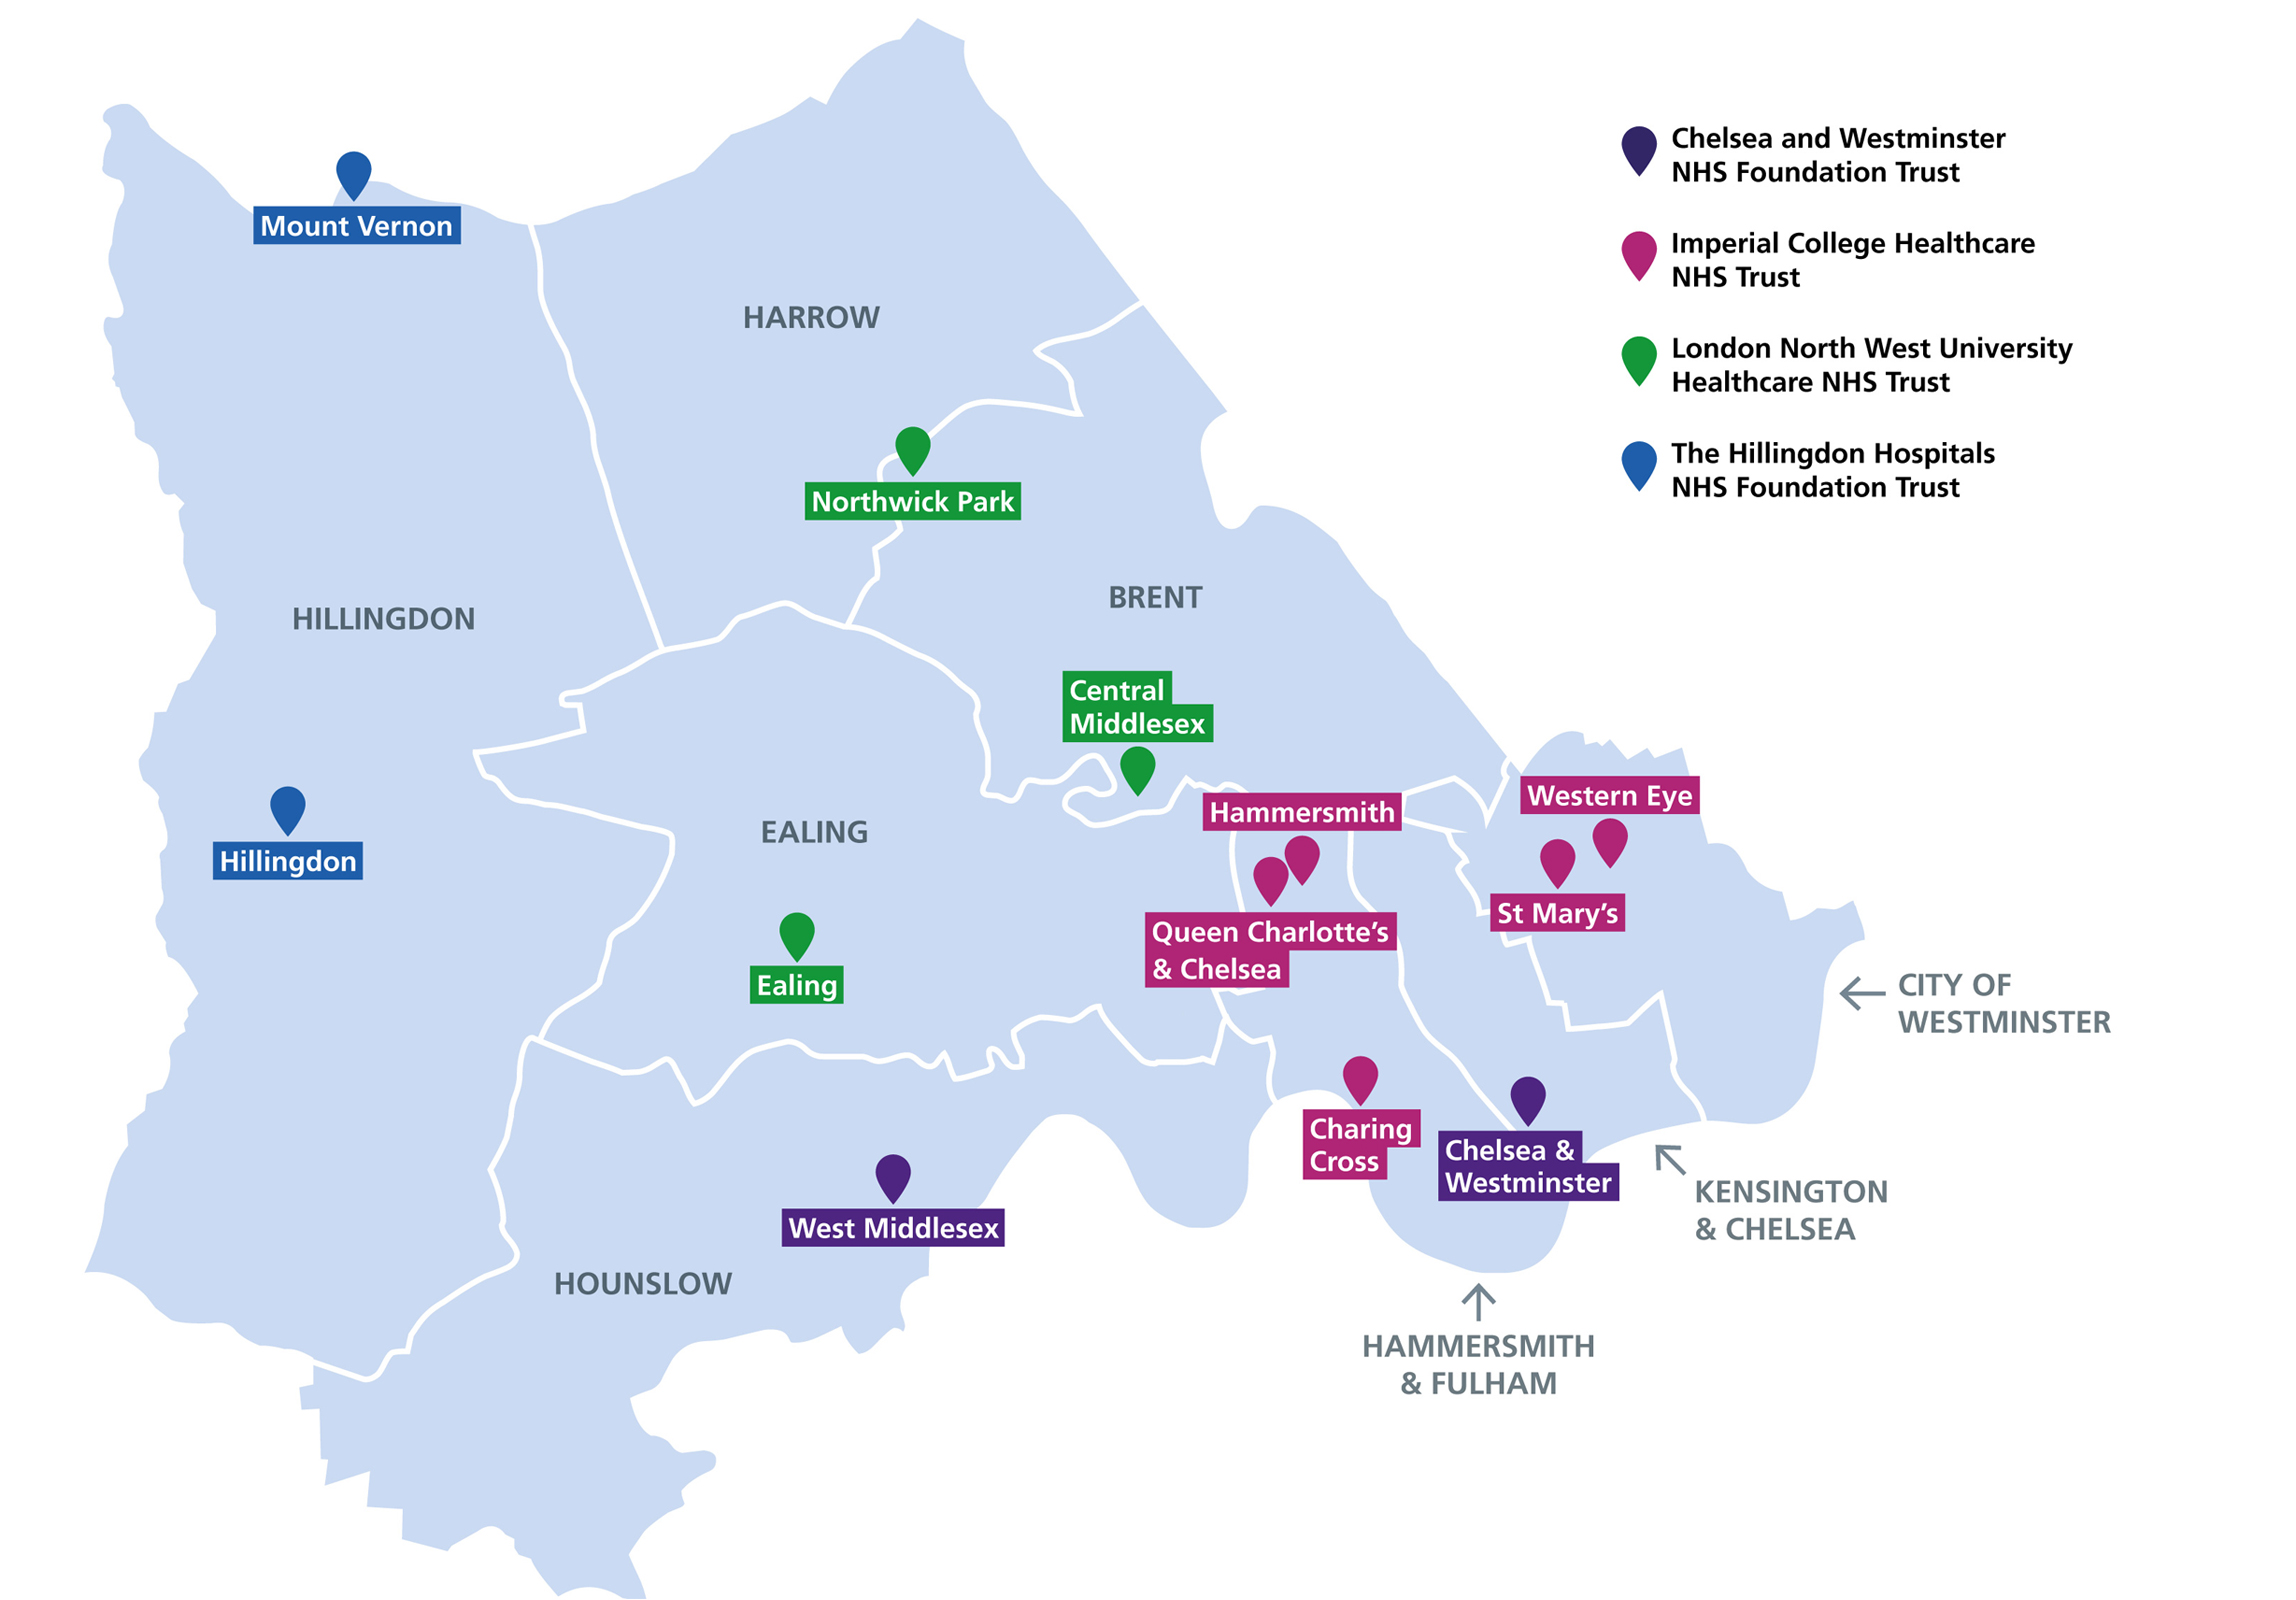 North west London acute provider collaborative map